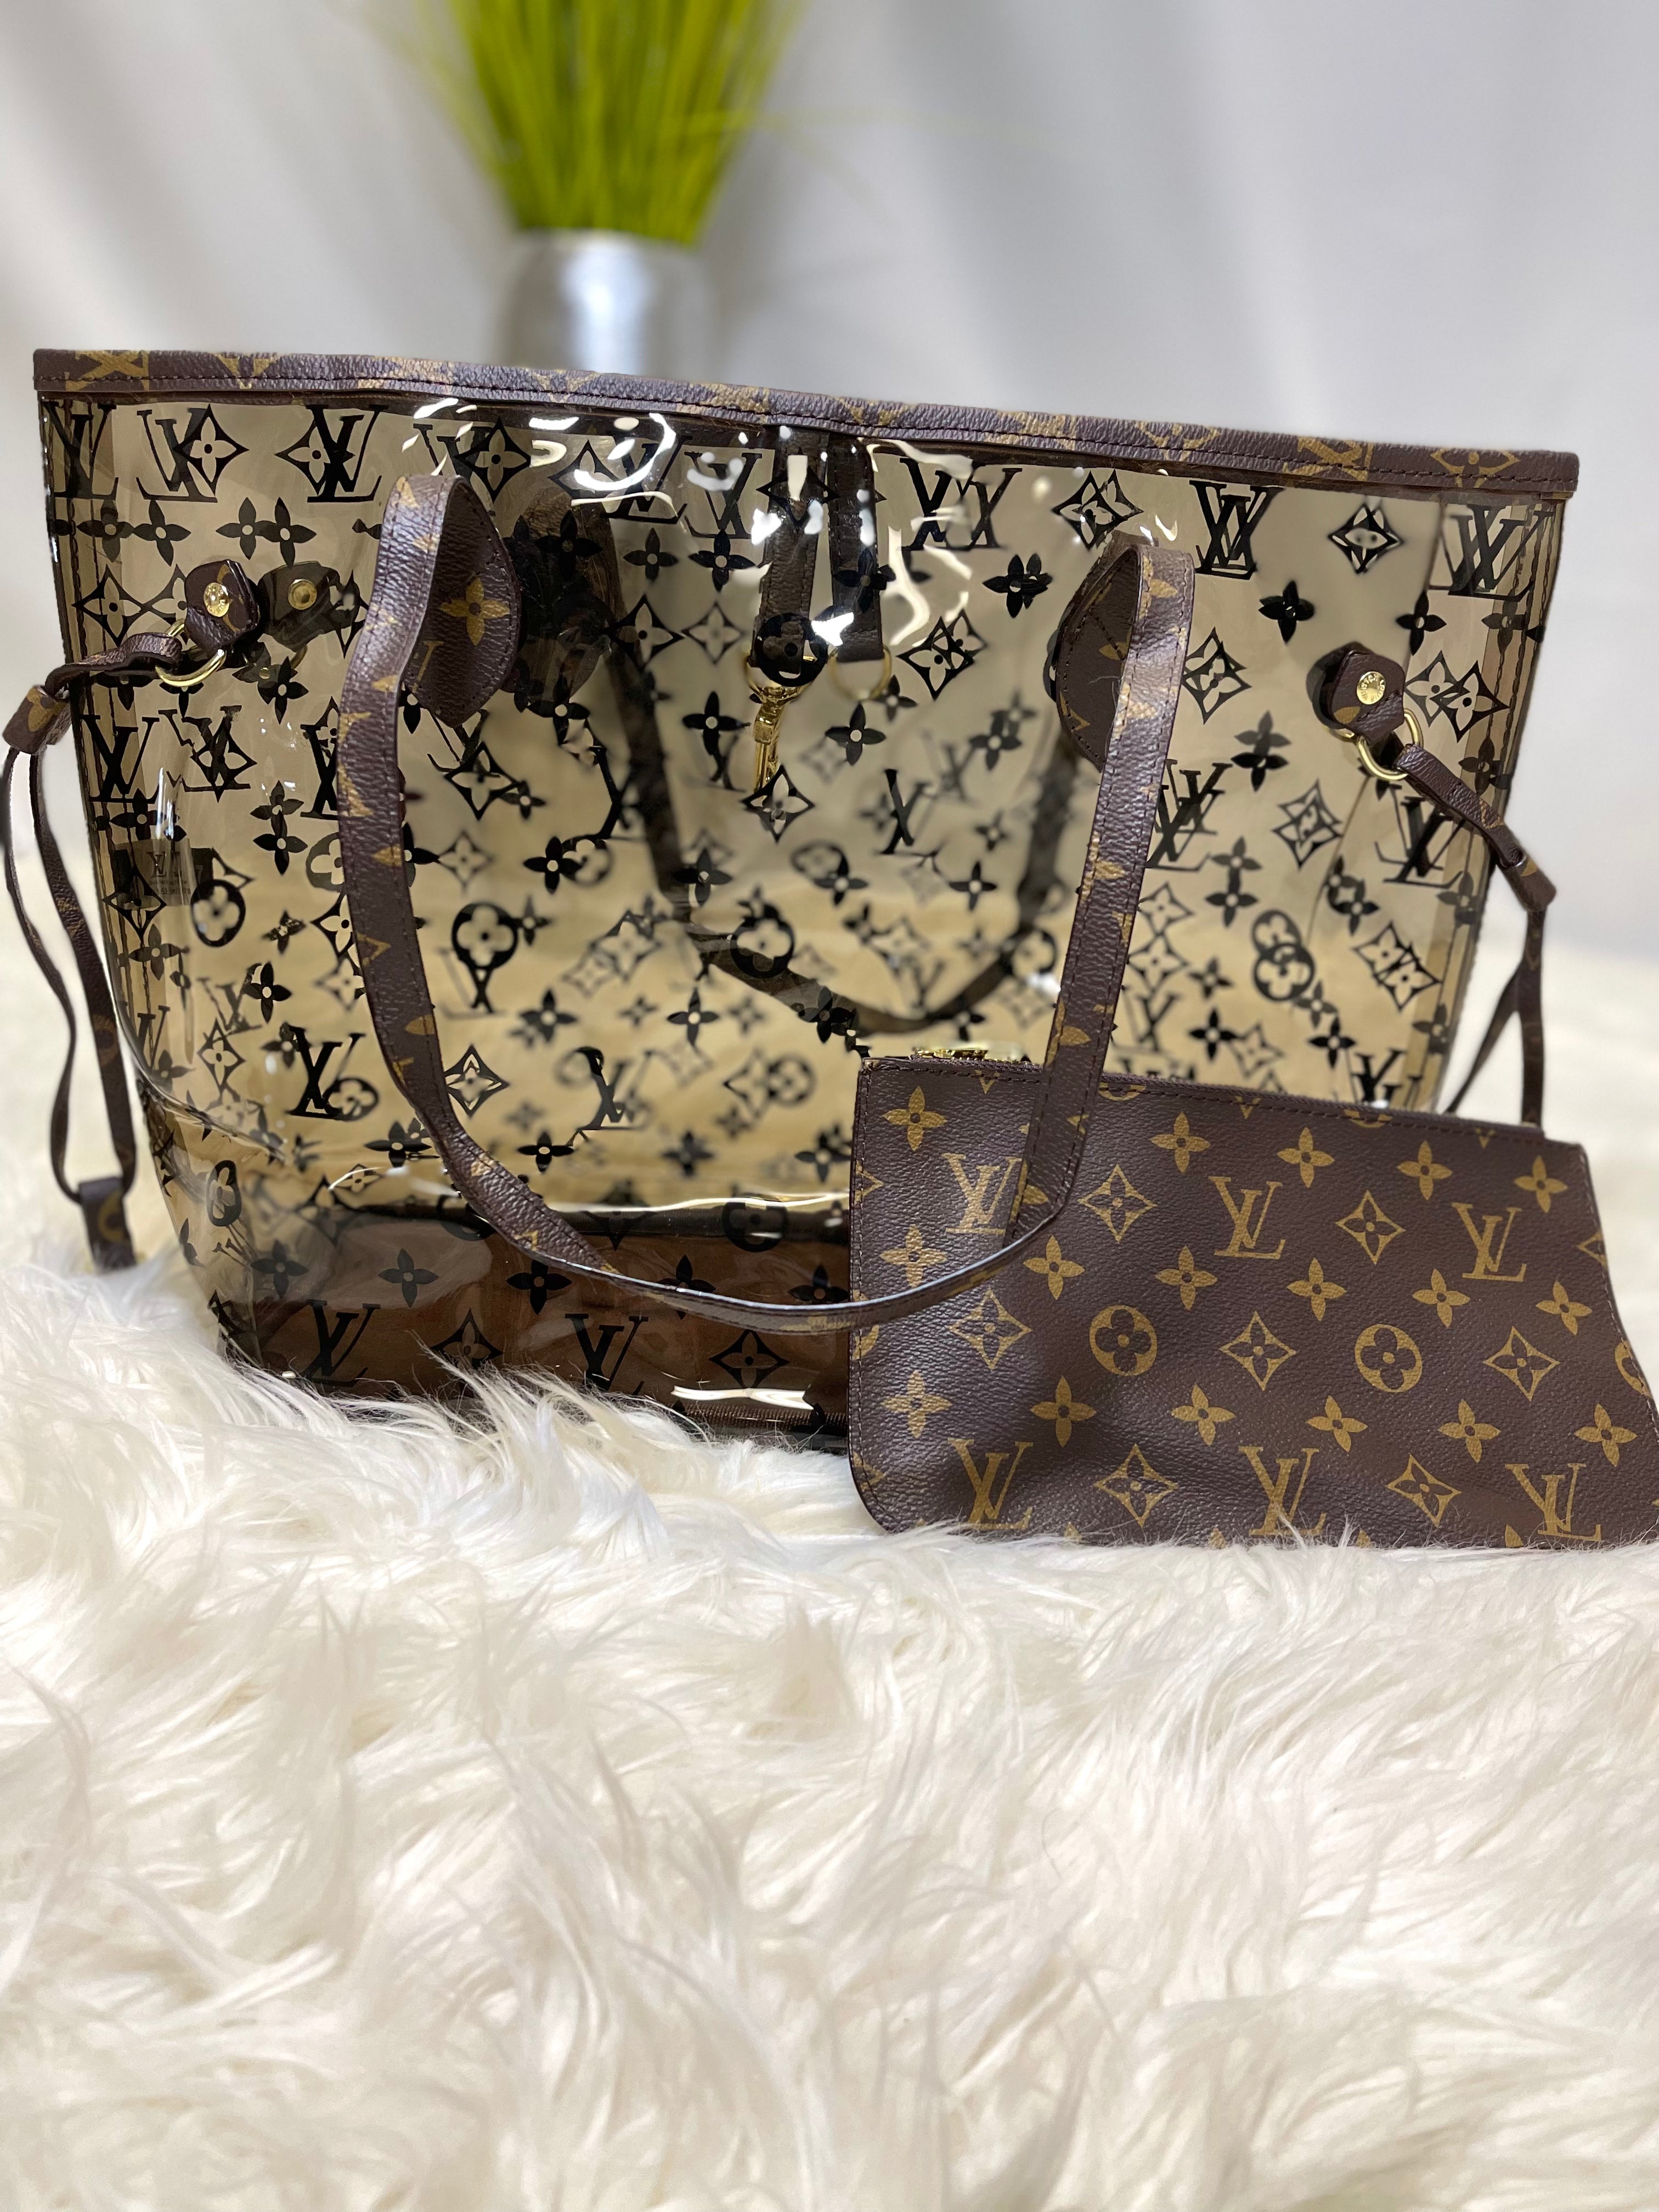 LV Inspired Clear Bag & Clutch